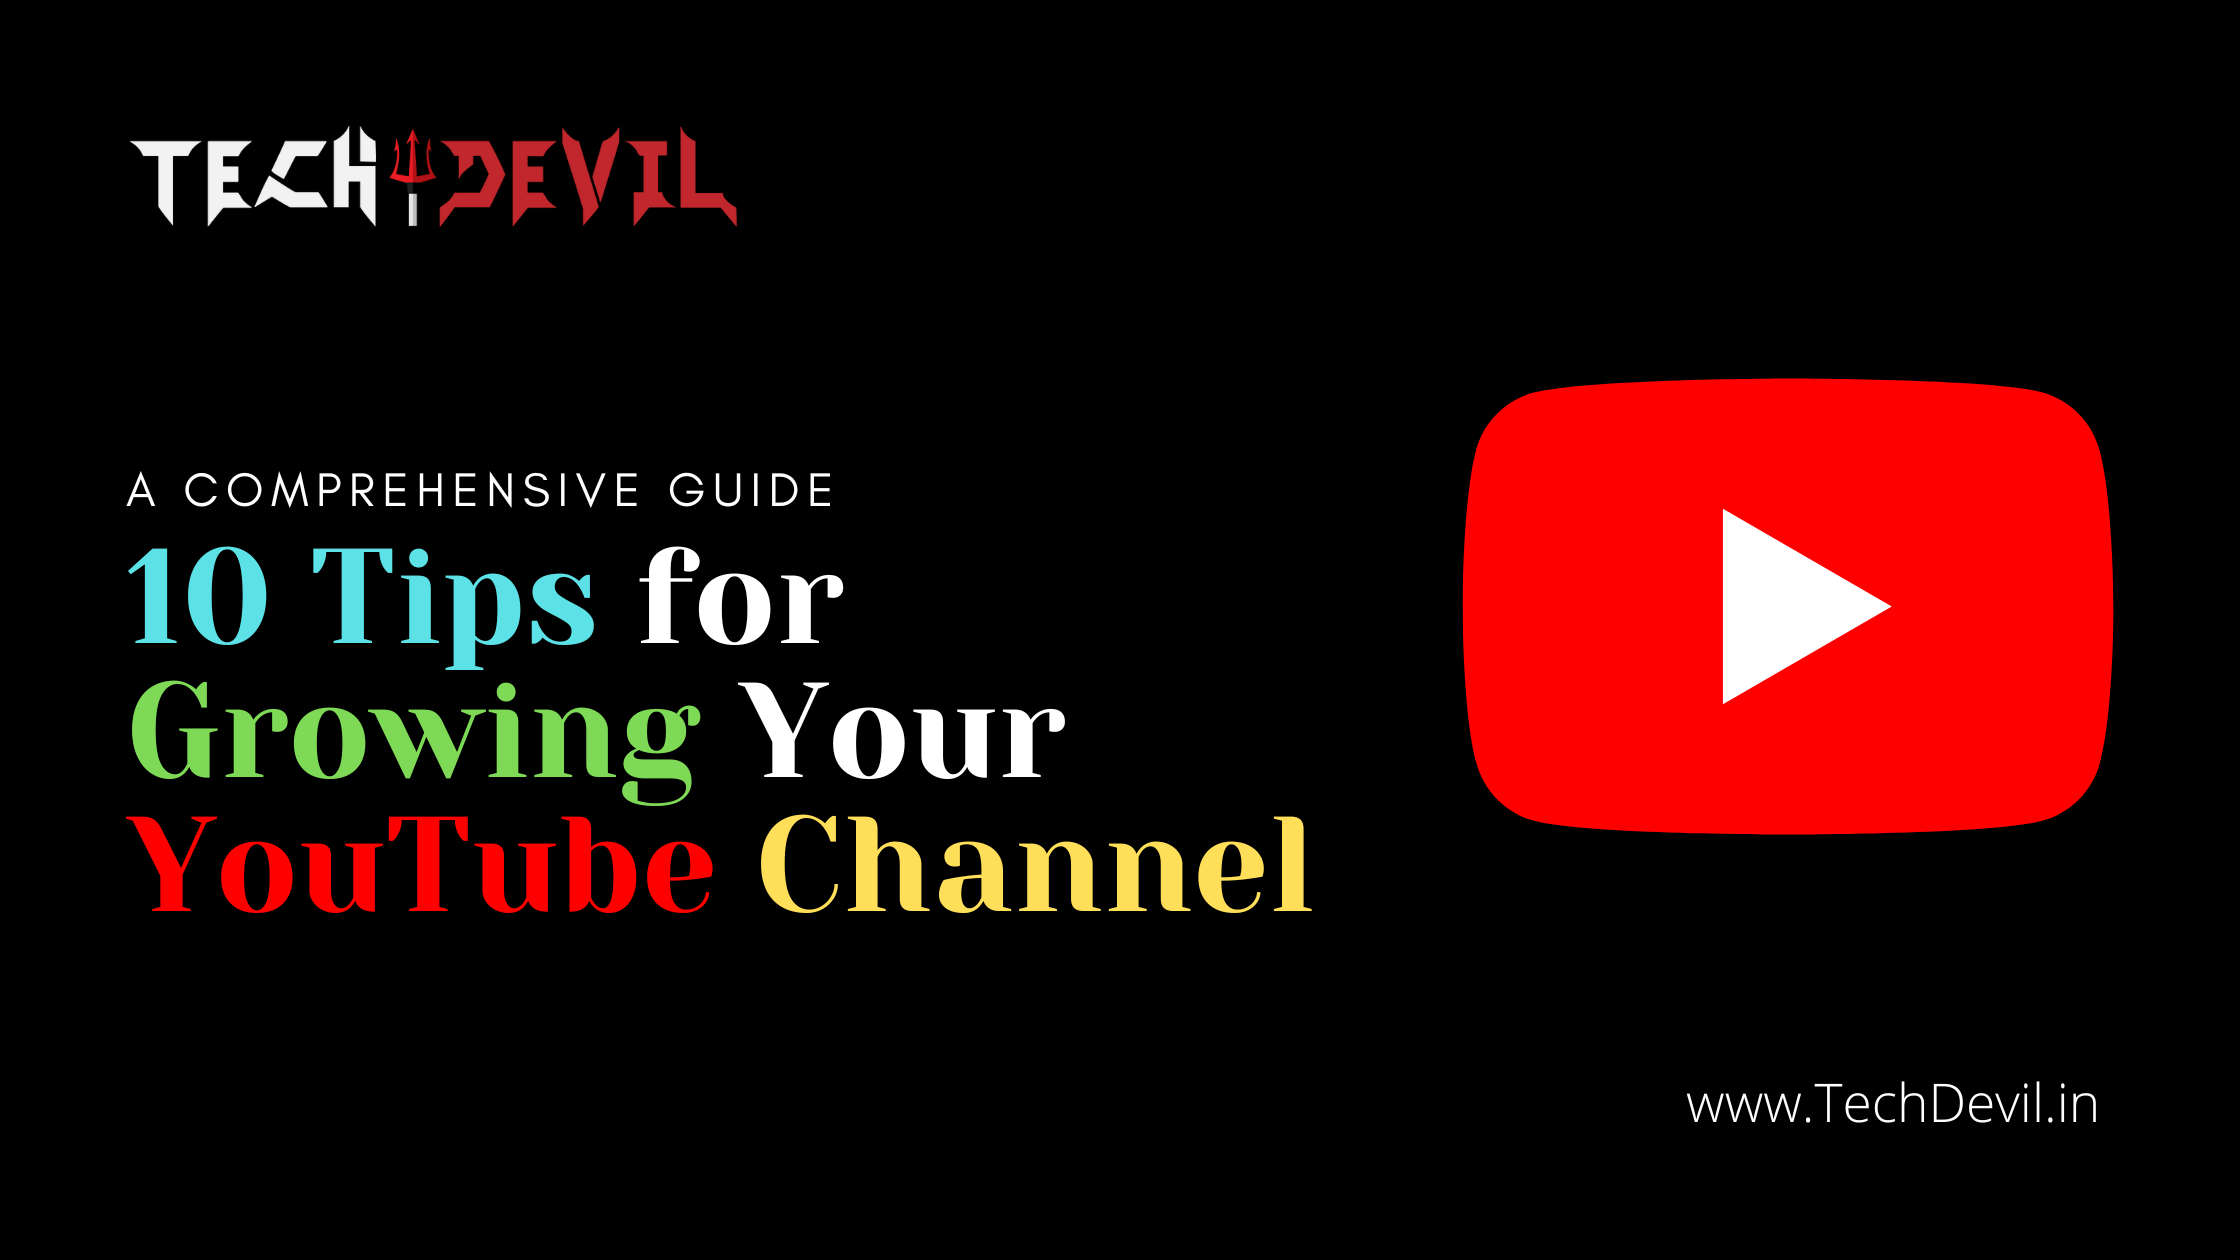 10 Tips for Growing Your YouTube Channel: A Comprehensive Guide